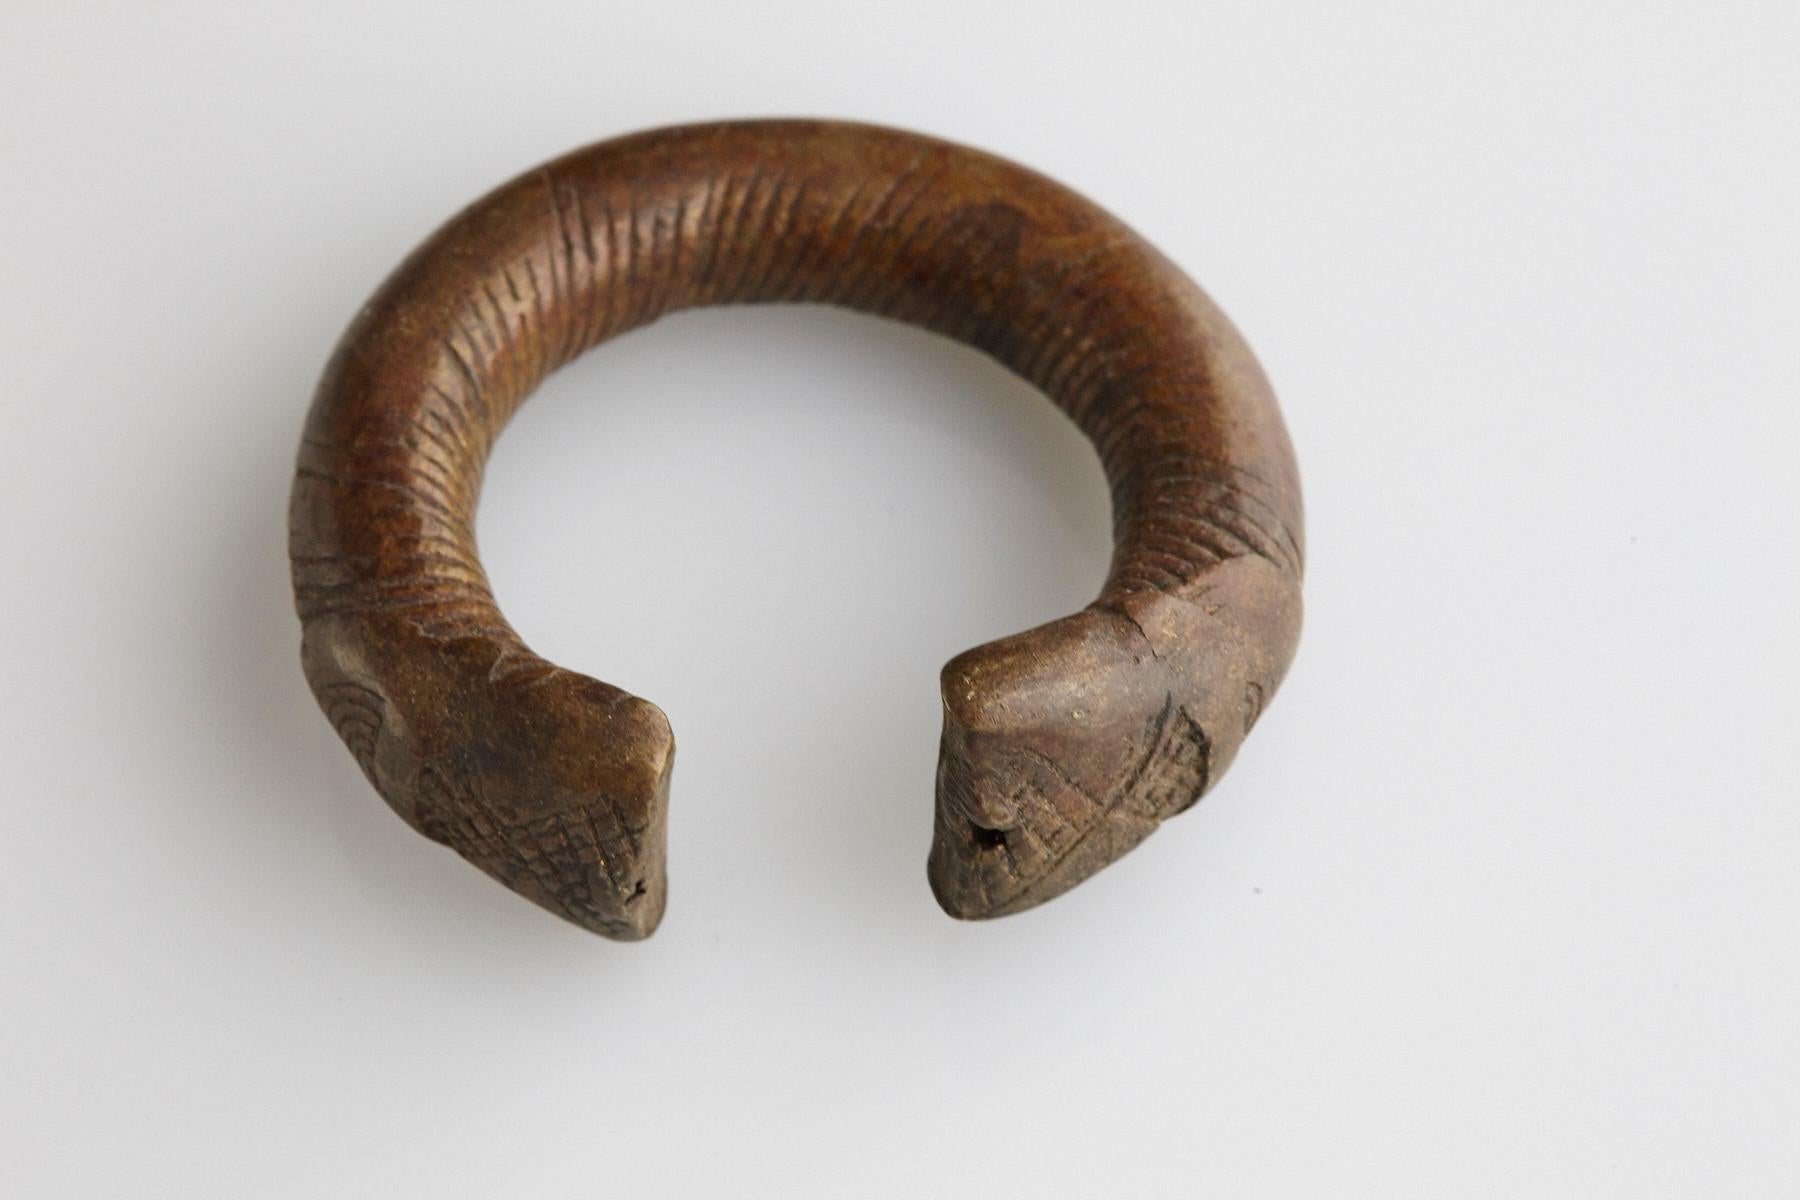 19th-century bronze currency bracelet / Manilla in horseshoe form with fixed opening. Intricate graphical swirl design and tips are shaped with large flat ends with cross pattern designs. This type of bracelet was used and worn by the Baoule and